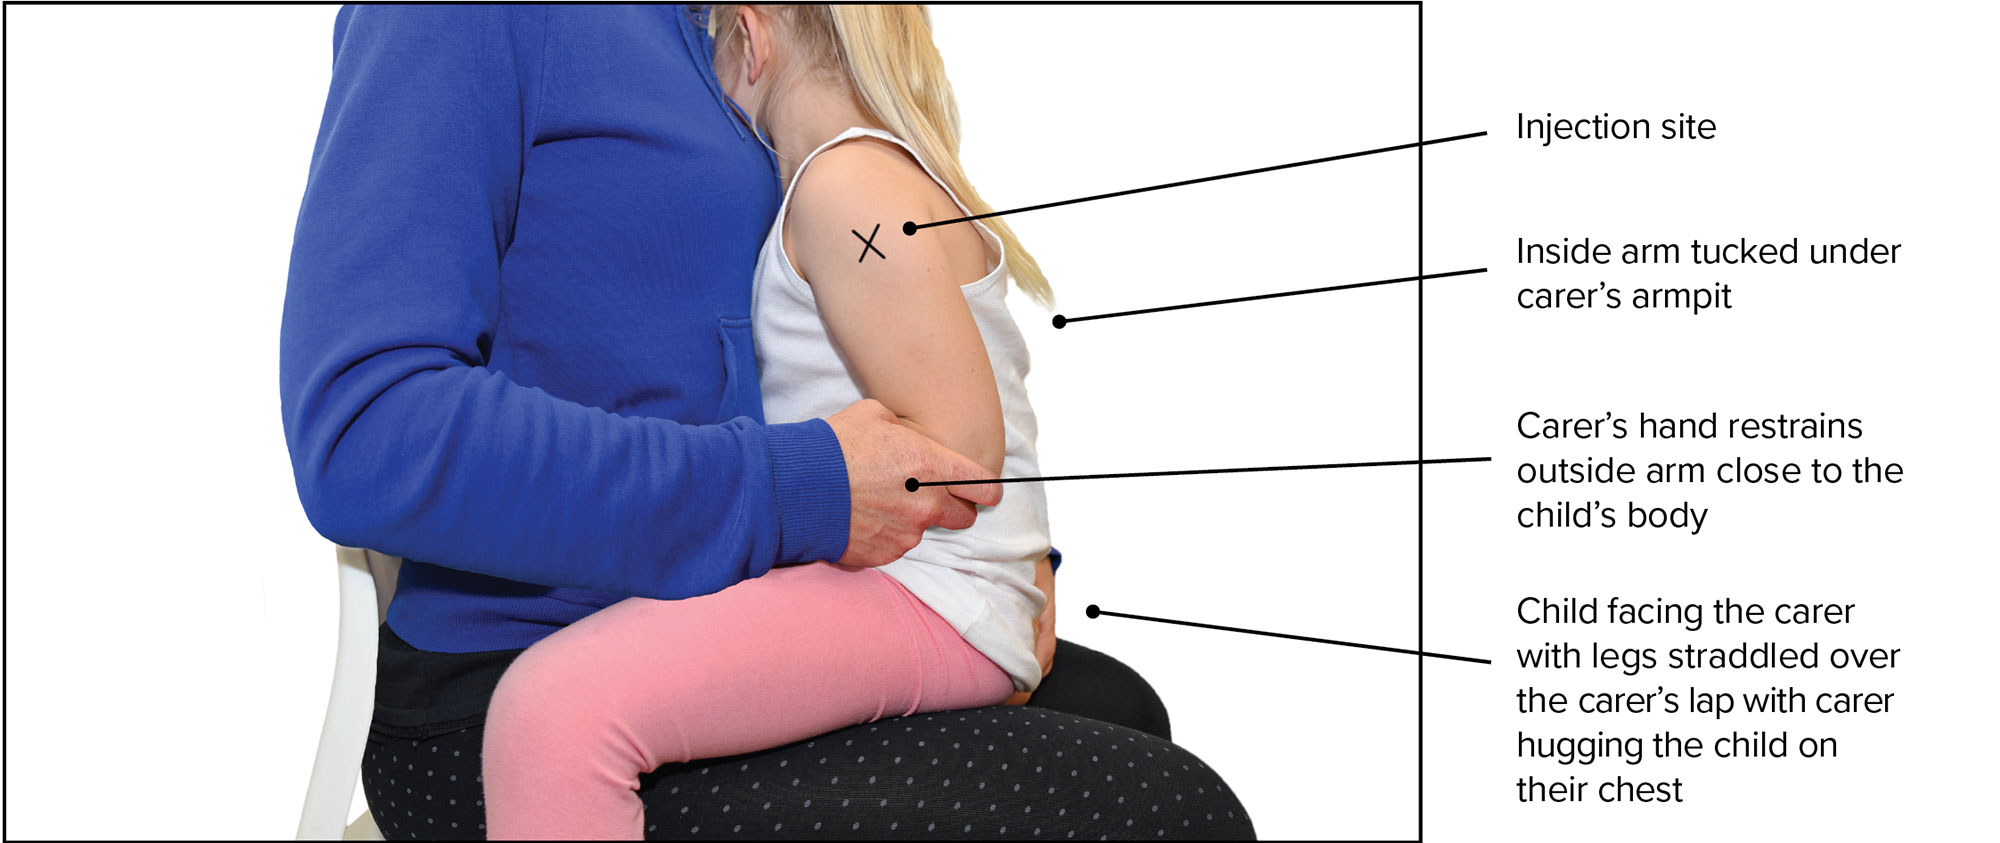 Image showing ideal position for children during vaccinations